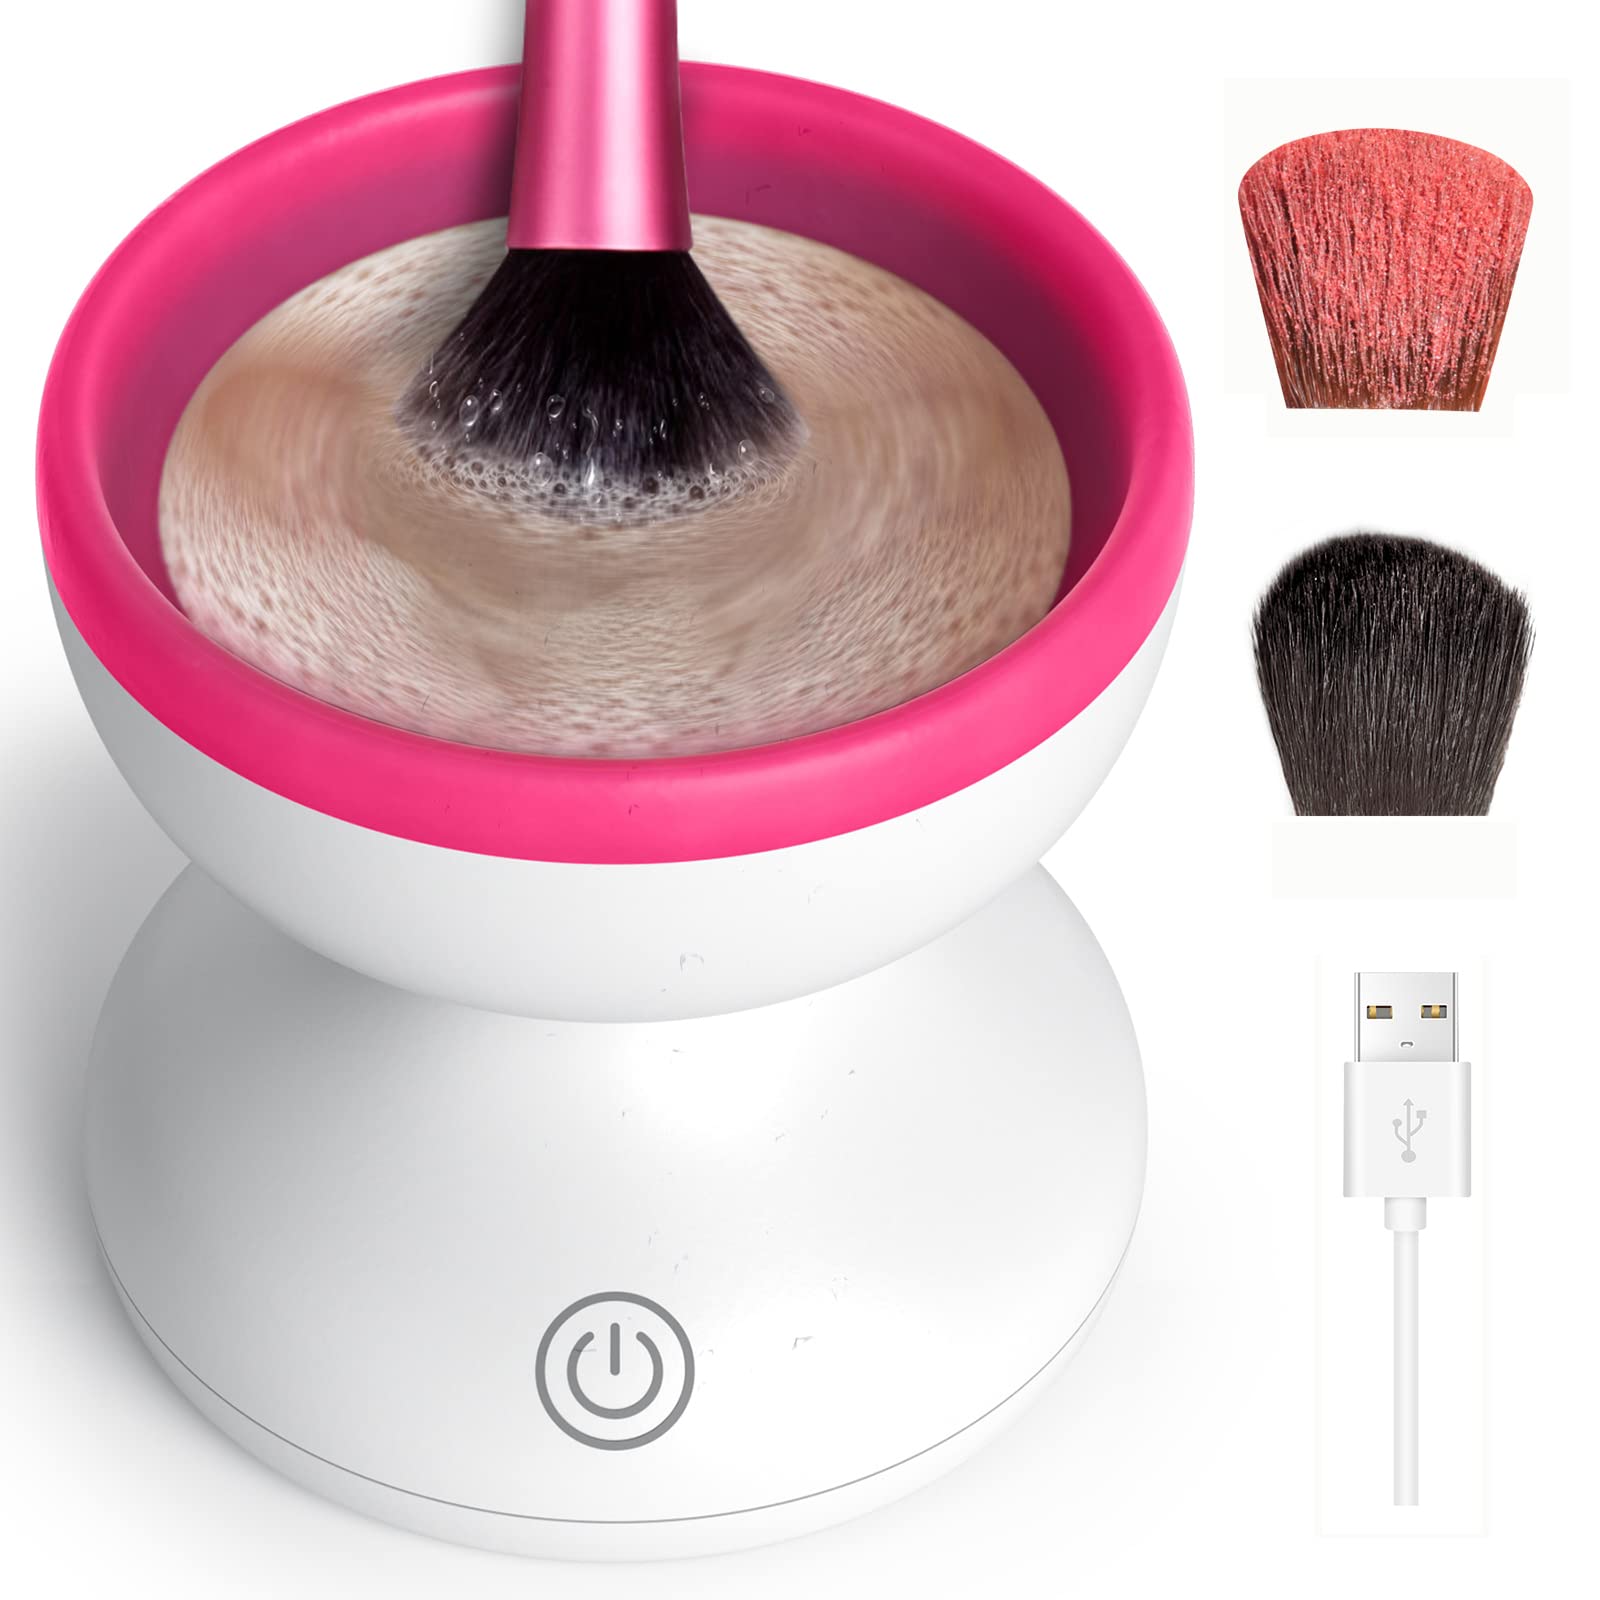 Alyfini Makeup Brush Cleaner Machine - Electric Makeup Brush Cleaner Tool  for All Size Beauty Foundation Concealer Contour Eyeshadow Brush (Pink)